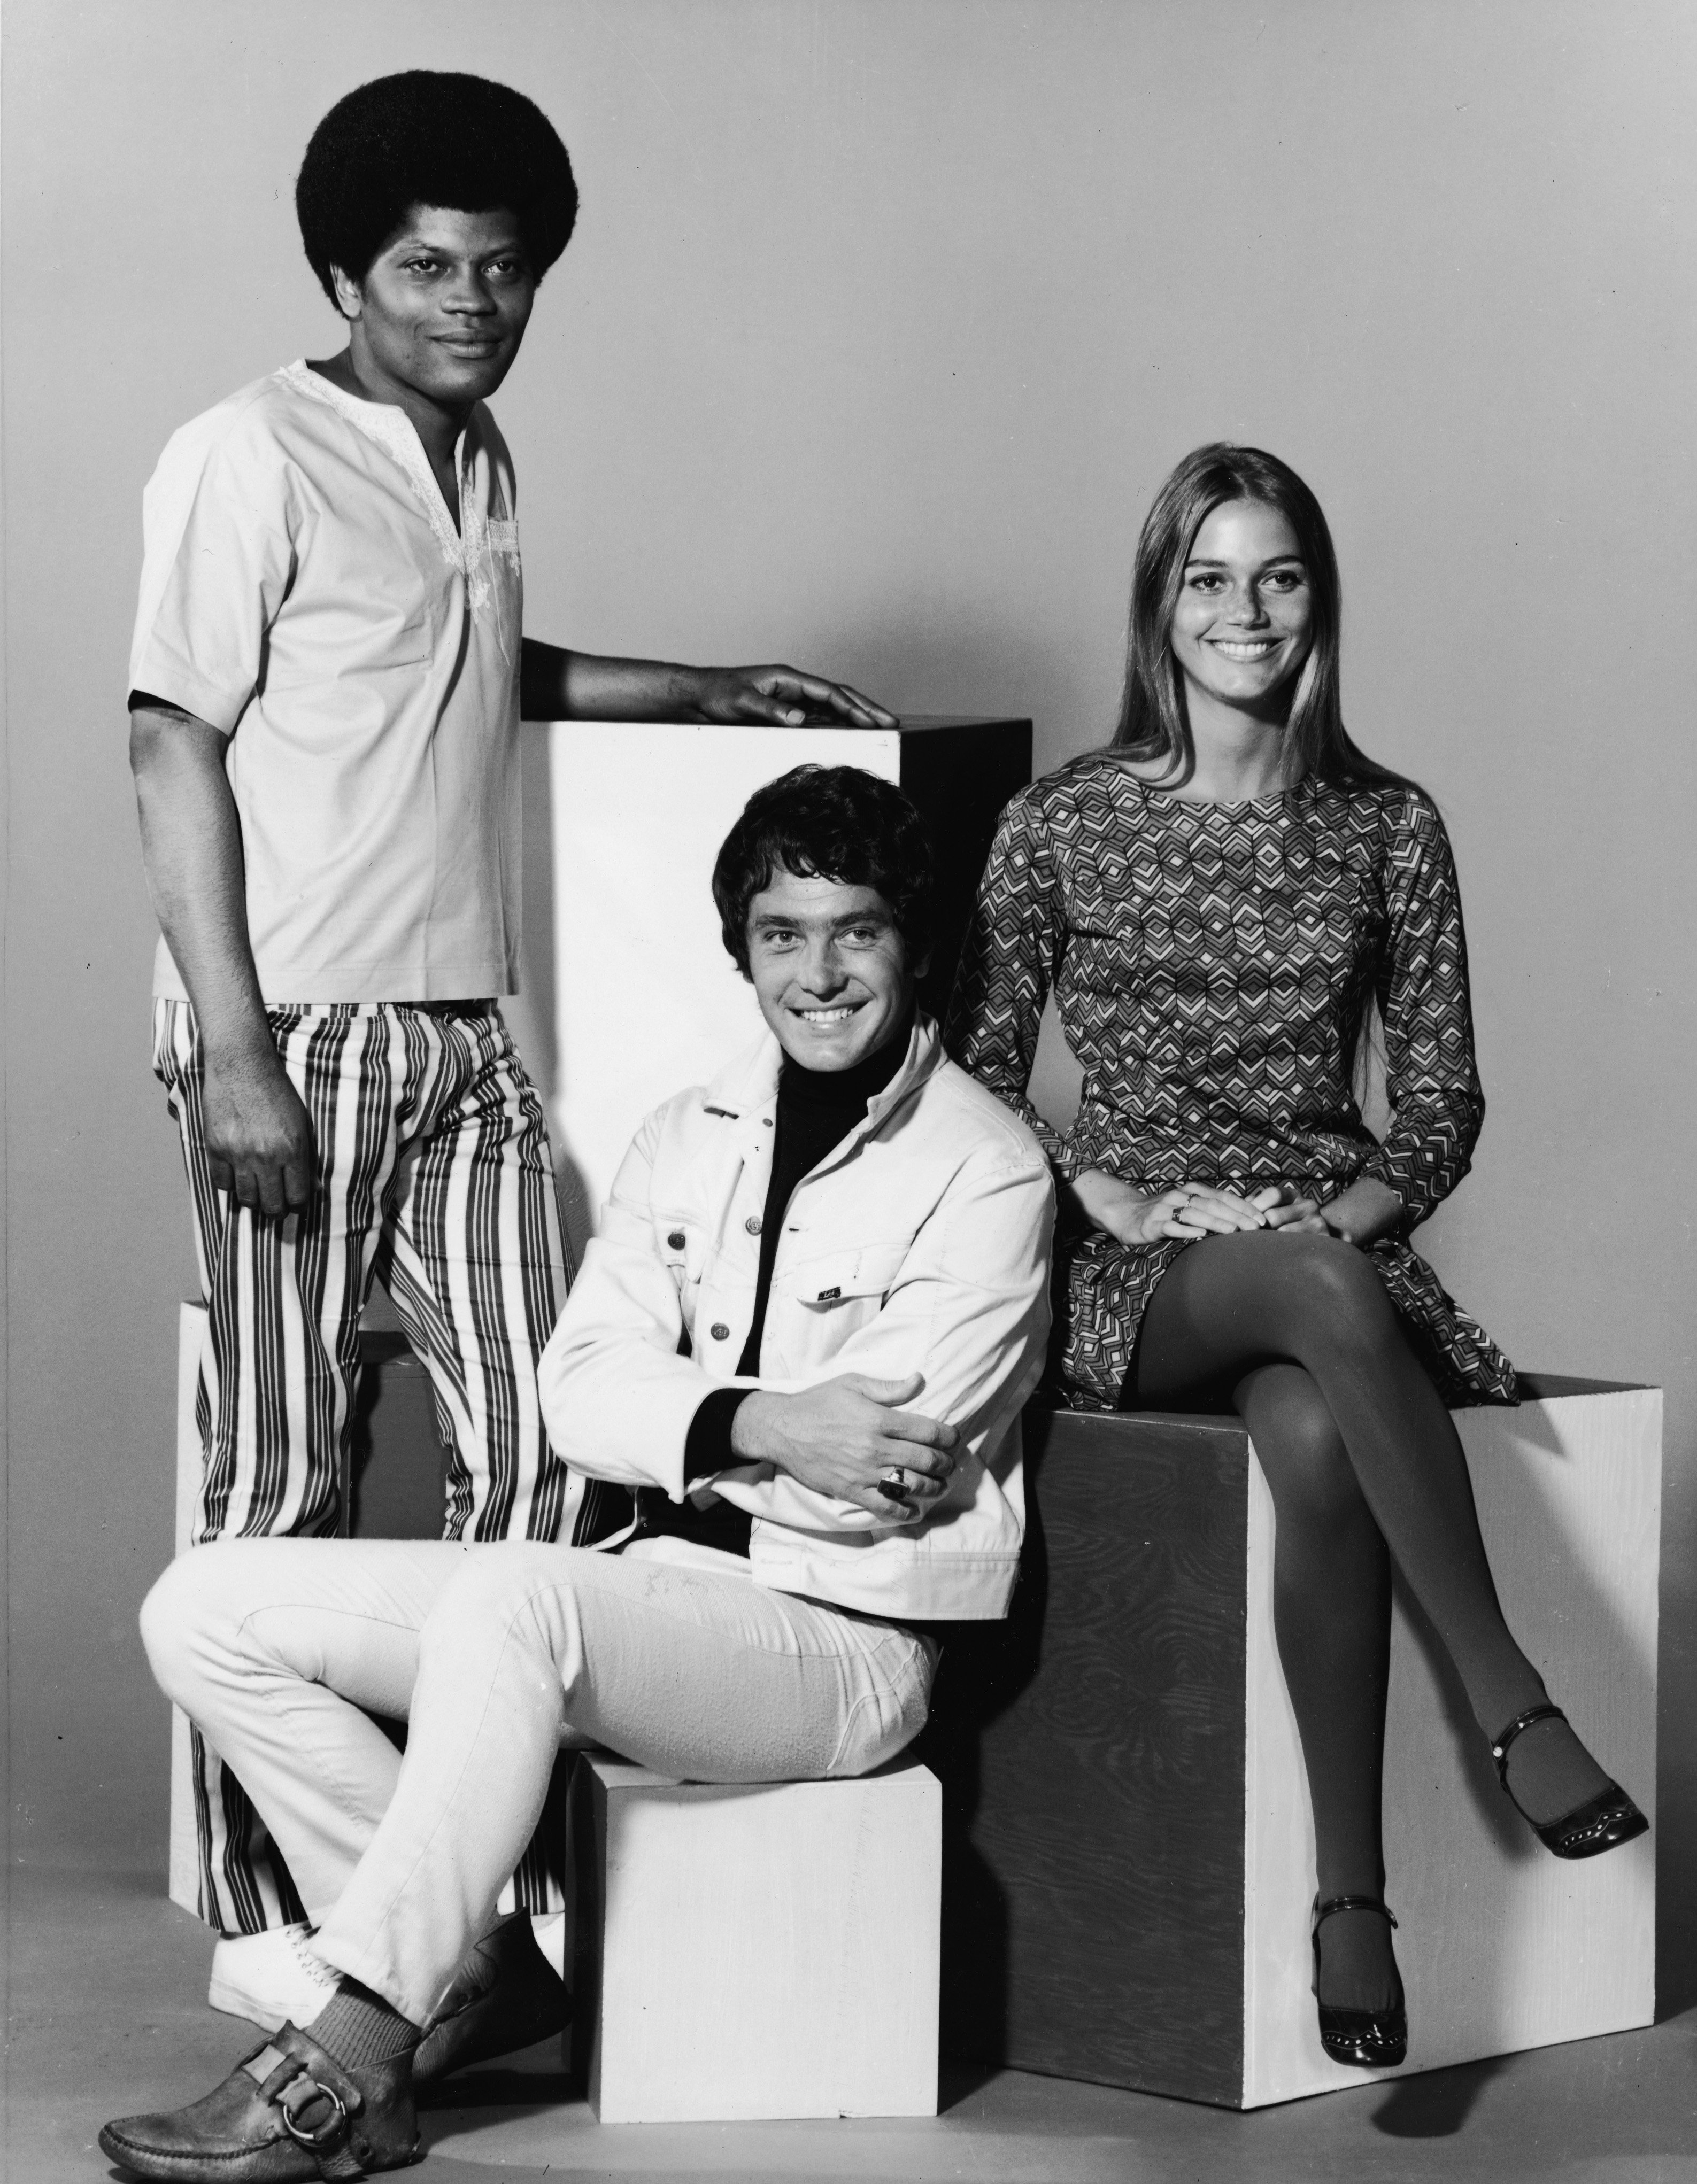 Peggy Lipton posing with Clarence Williams III and Michael Cole for the show "The Mod Squad" in 1968 | Photo: Getty Images